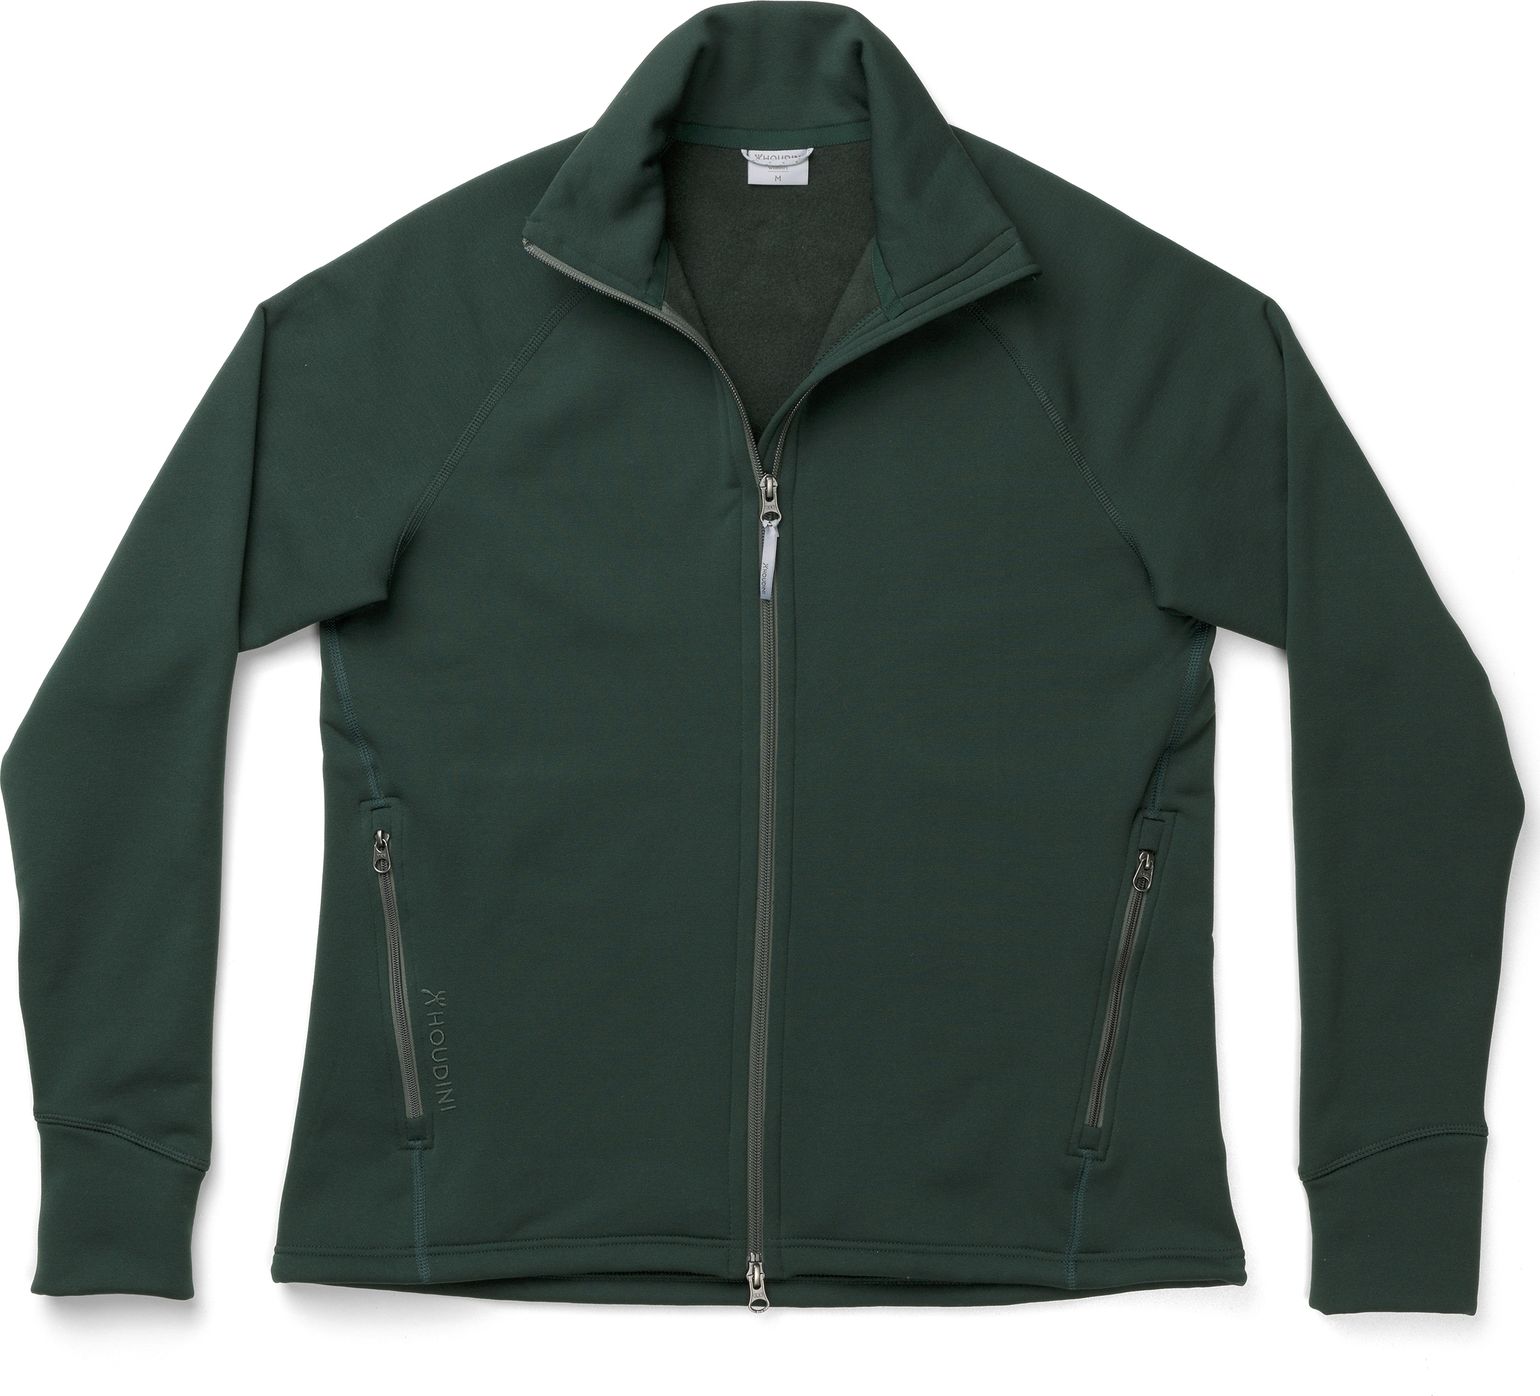 Women's Power Up Jacket Mother of Greens